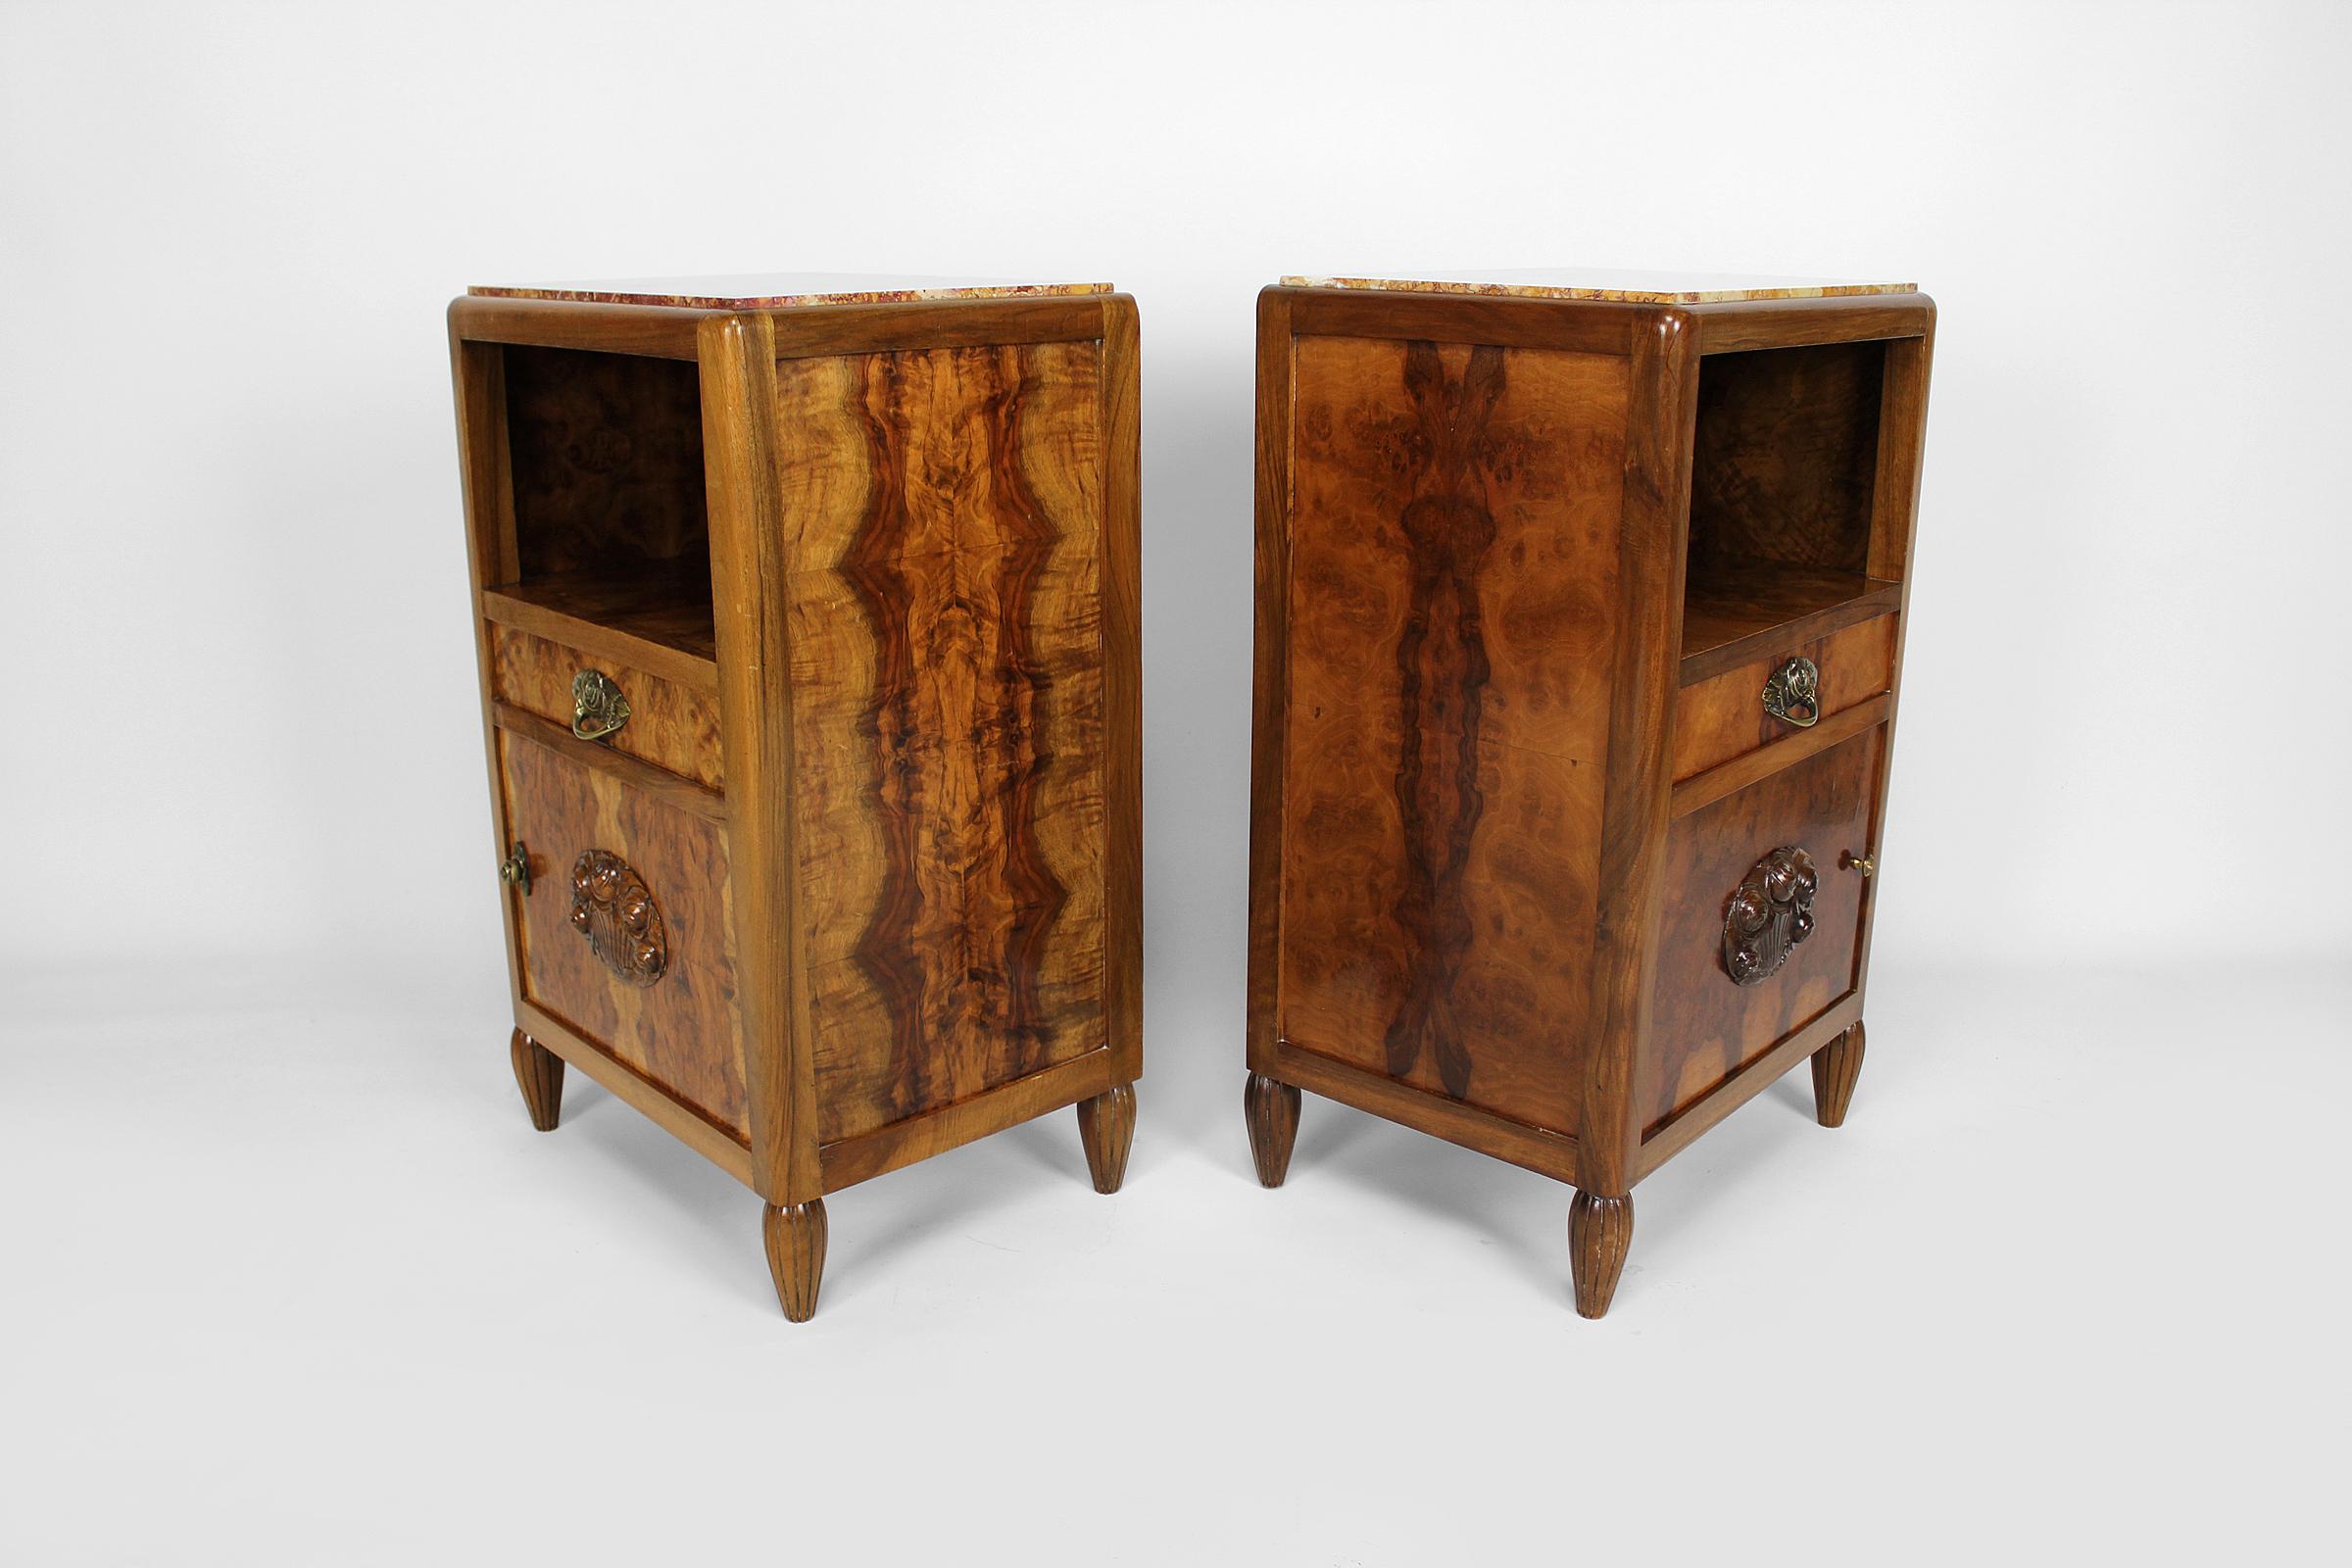 Pair of Art Deco Bedside Tables by Ateliers Gauthier-Poinsignon, circa 1920-1930 For Sale 1